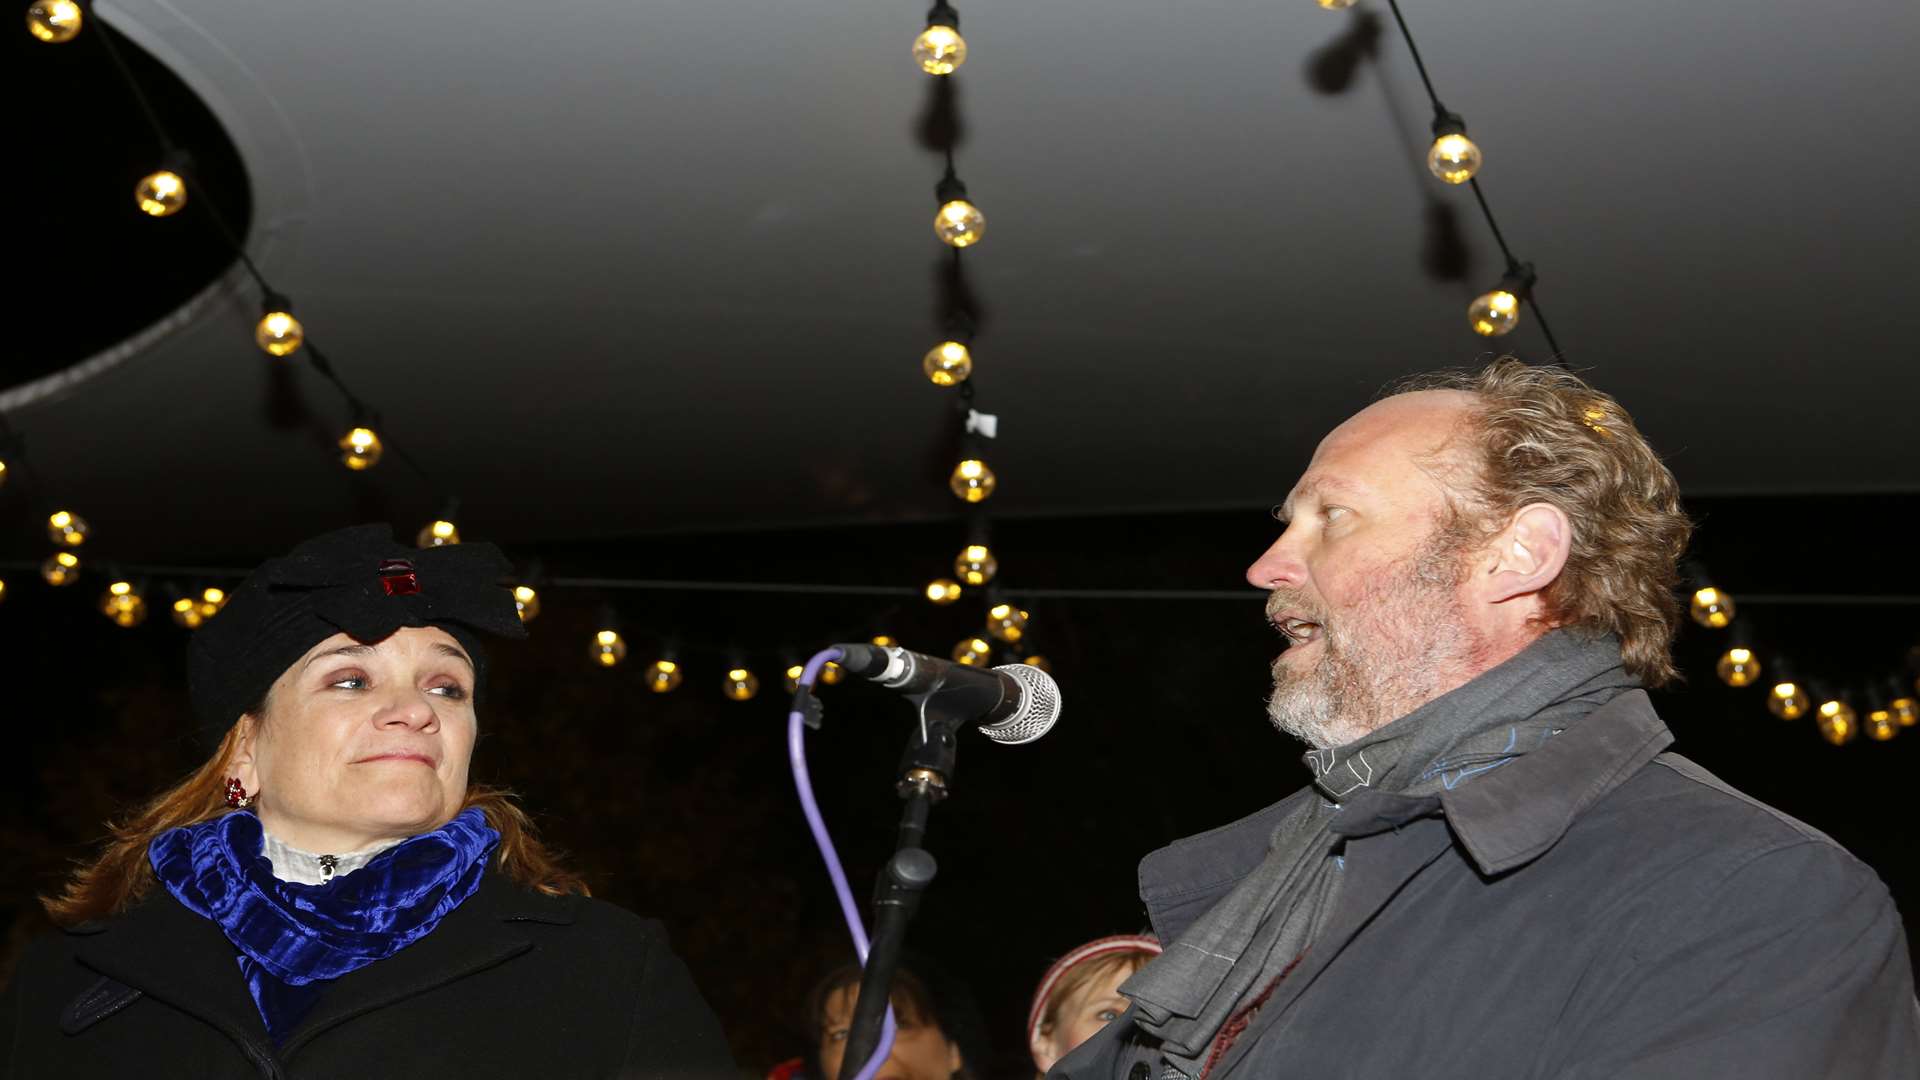 Author of Girl with a Pearl Earring, Tracy Chevalier, switched on the Creative Quarter lights at the opening night of the Folkestone Book Festival Picture: Andy Jones